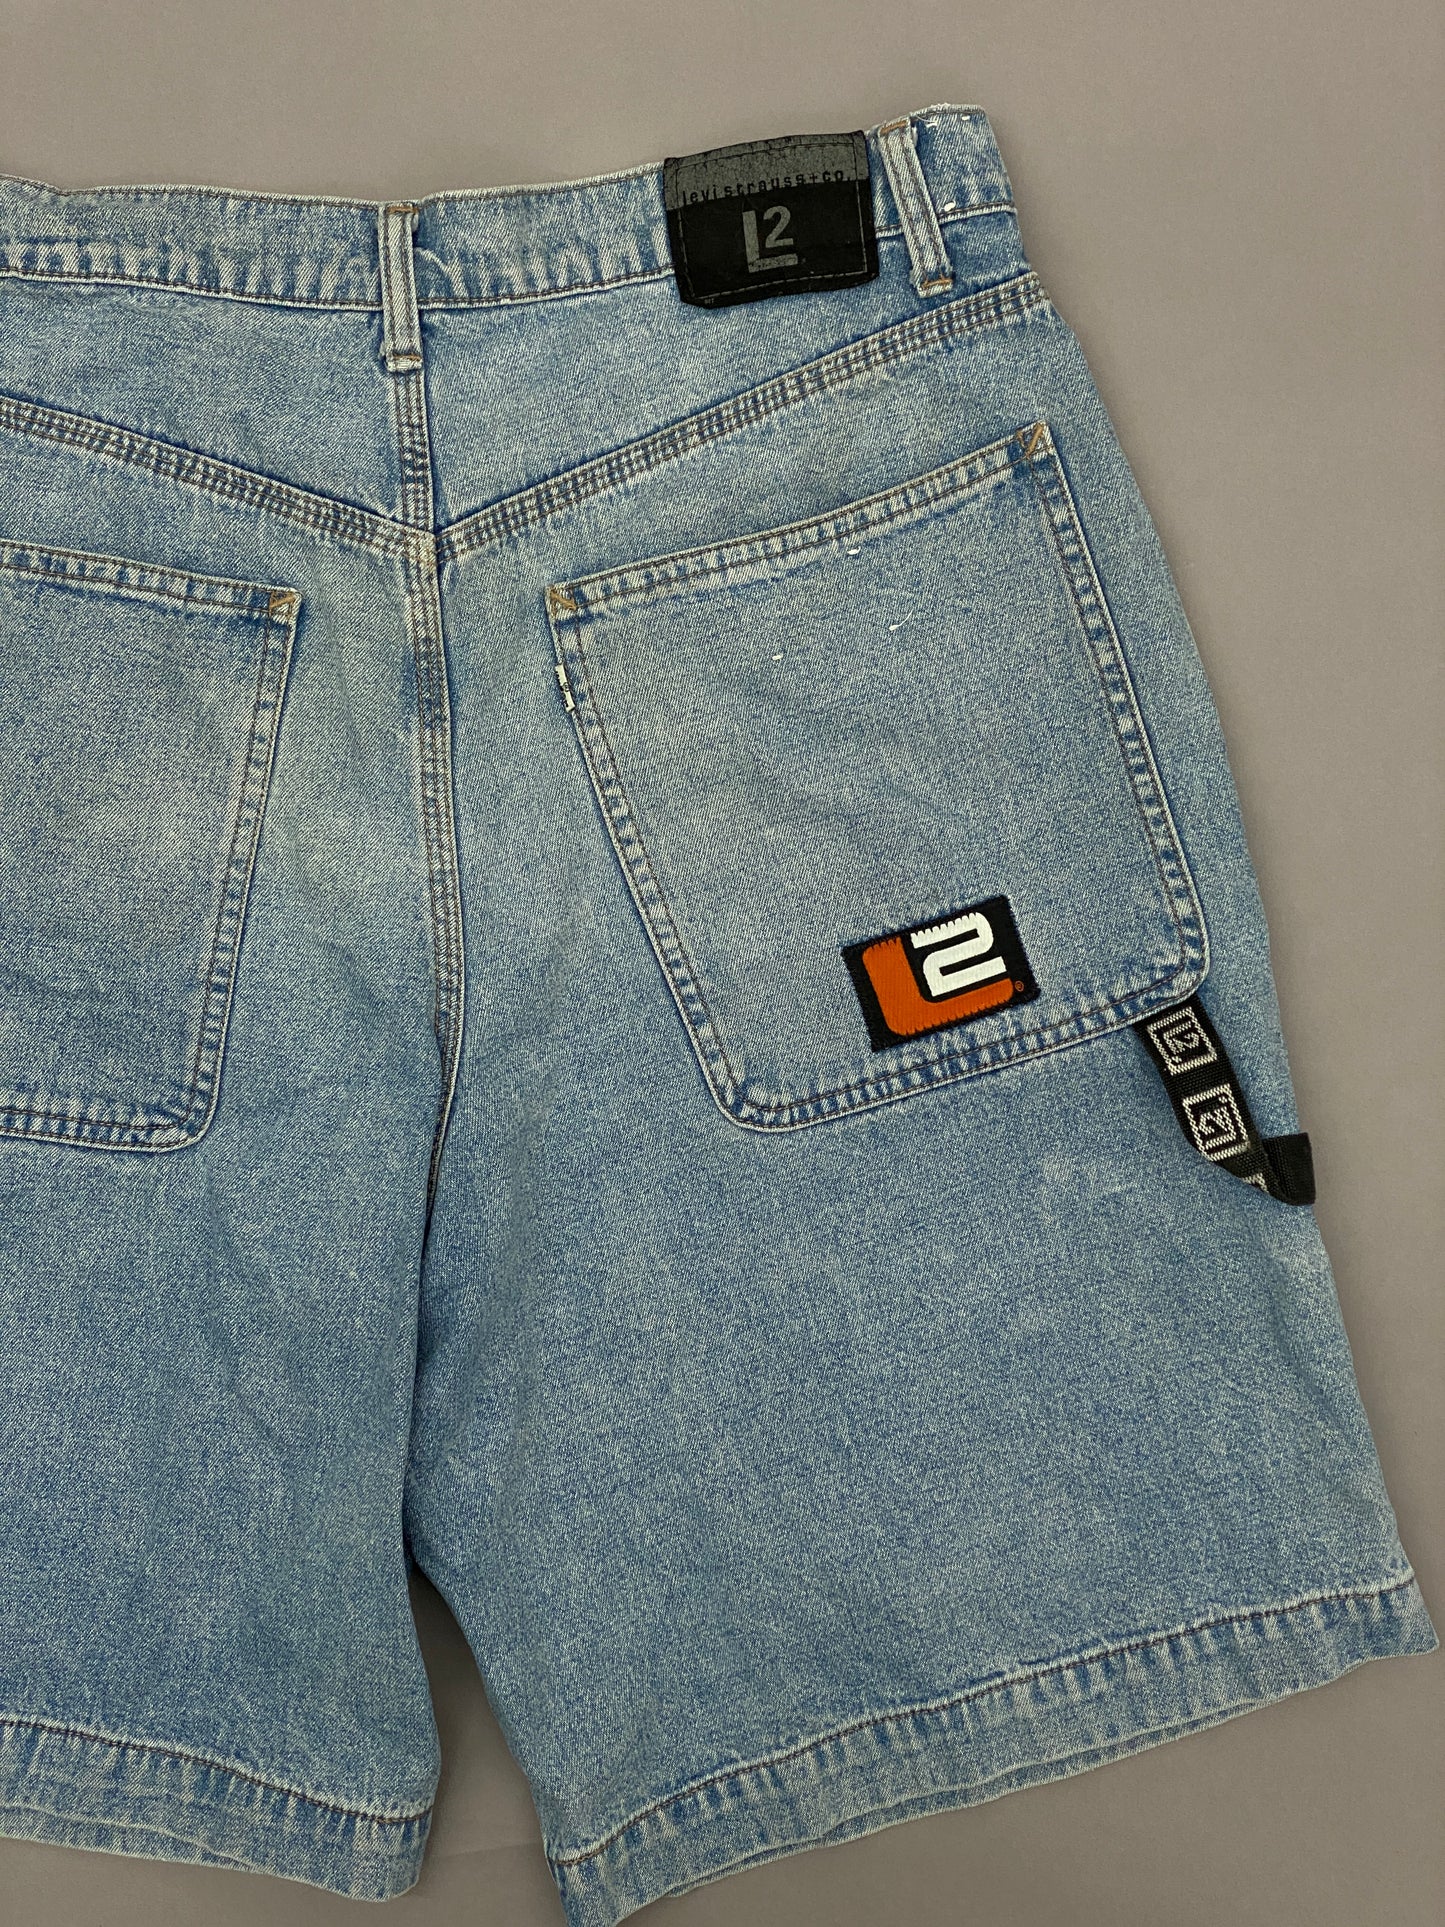 Shorts Baggy Levis Silver Tab Vintage - 32